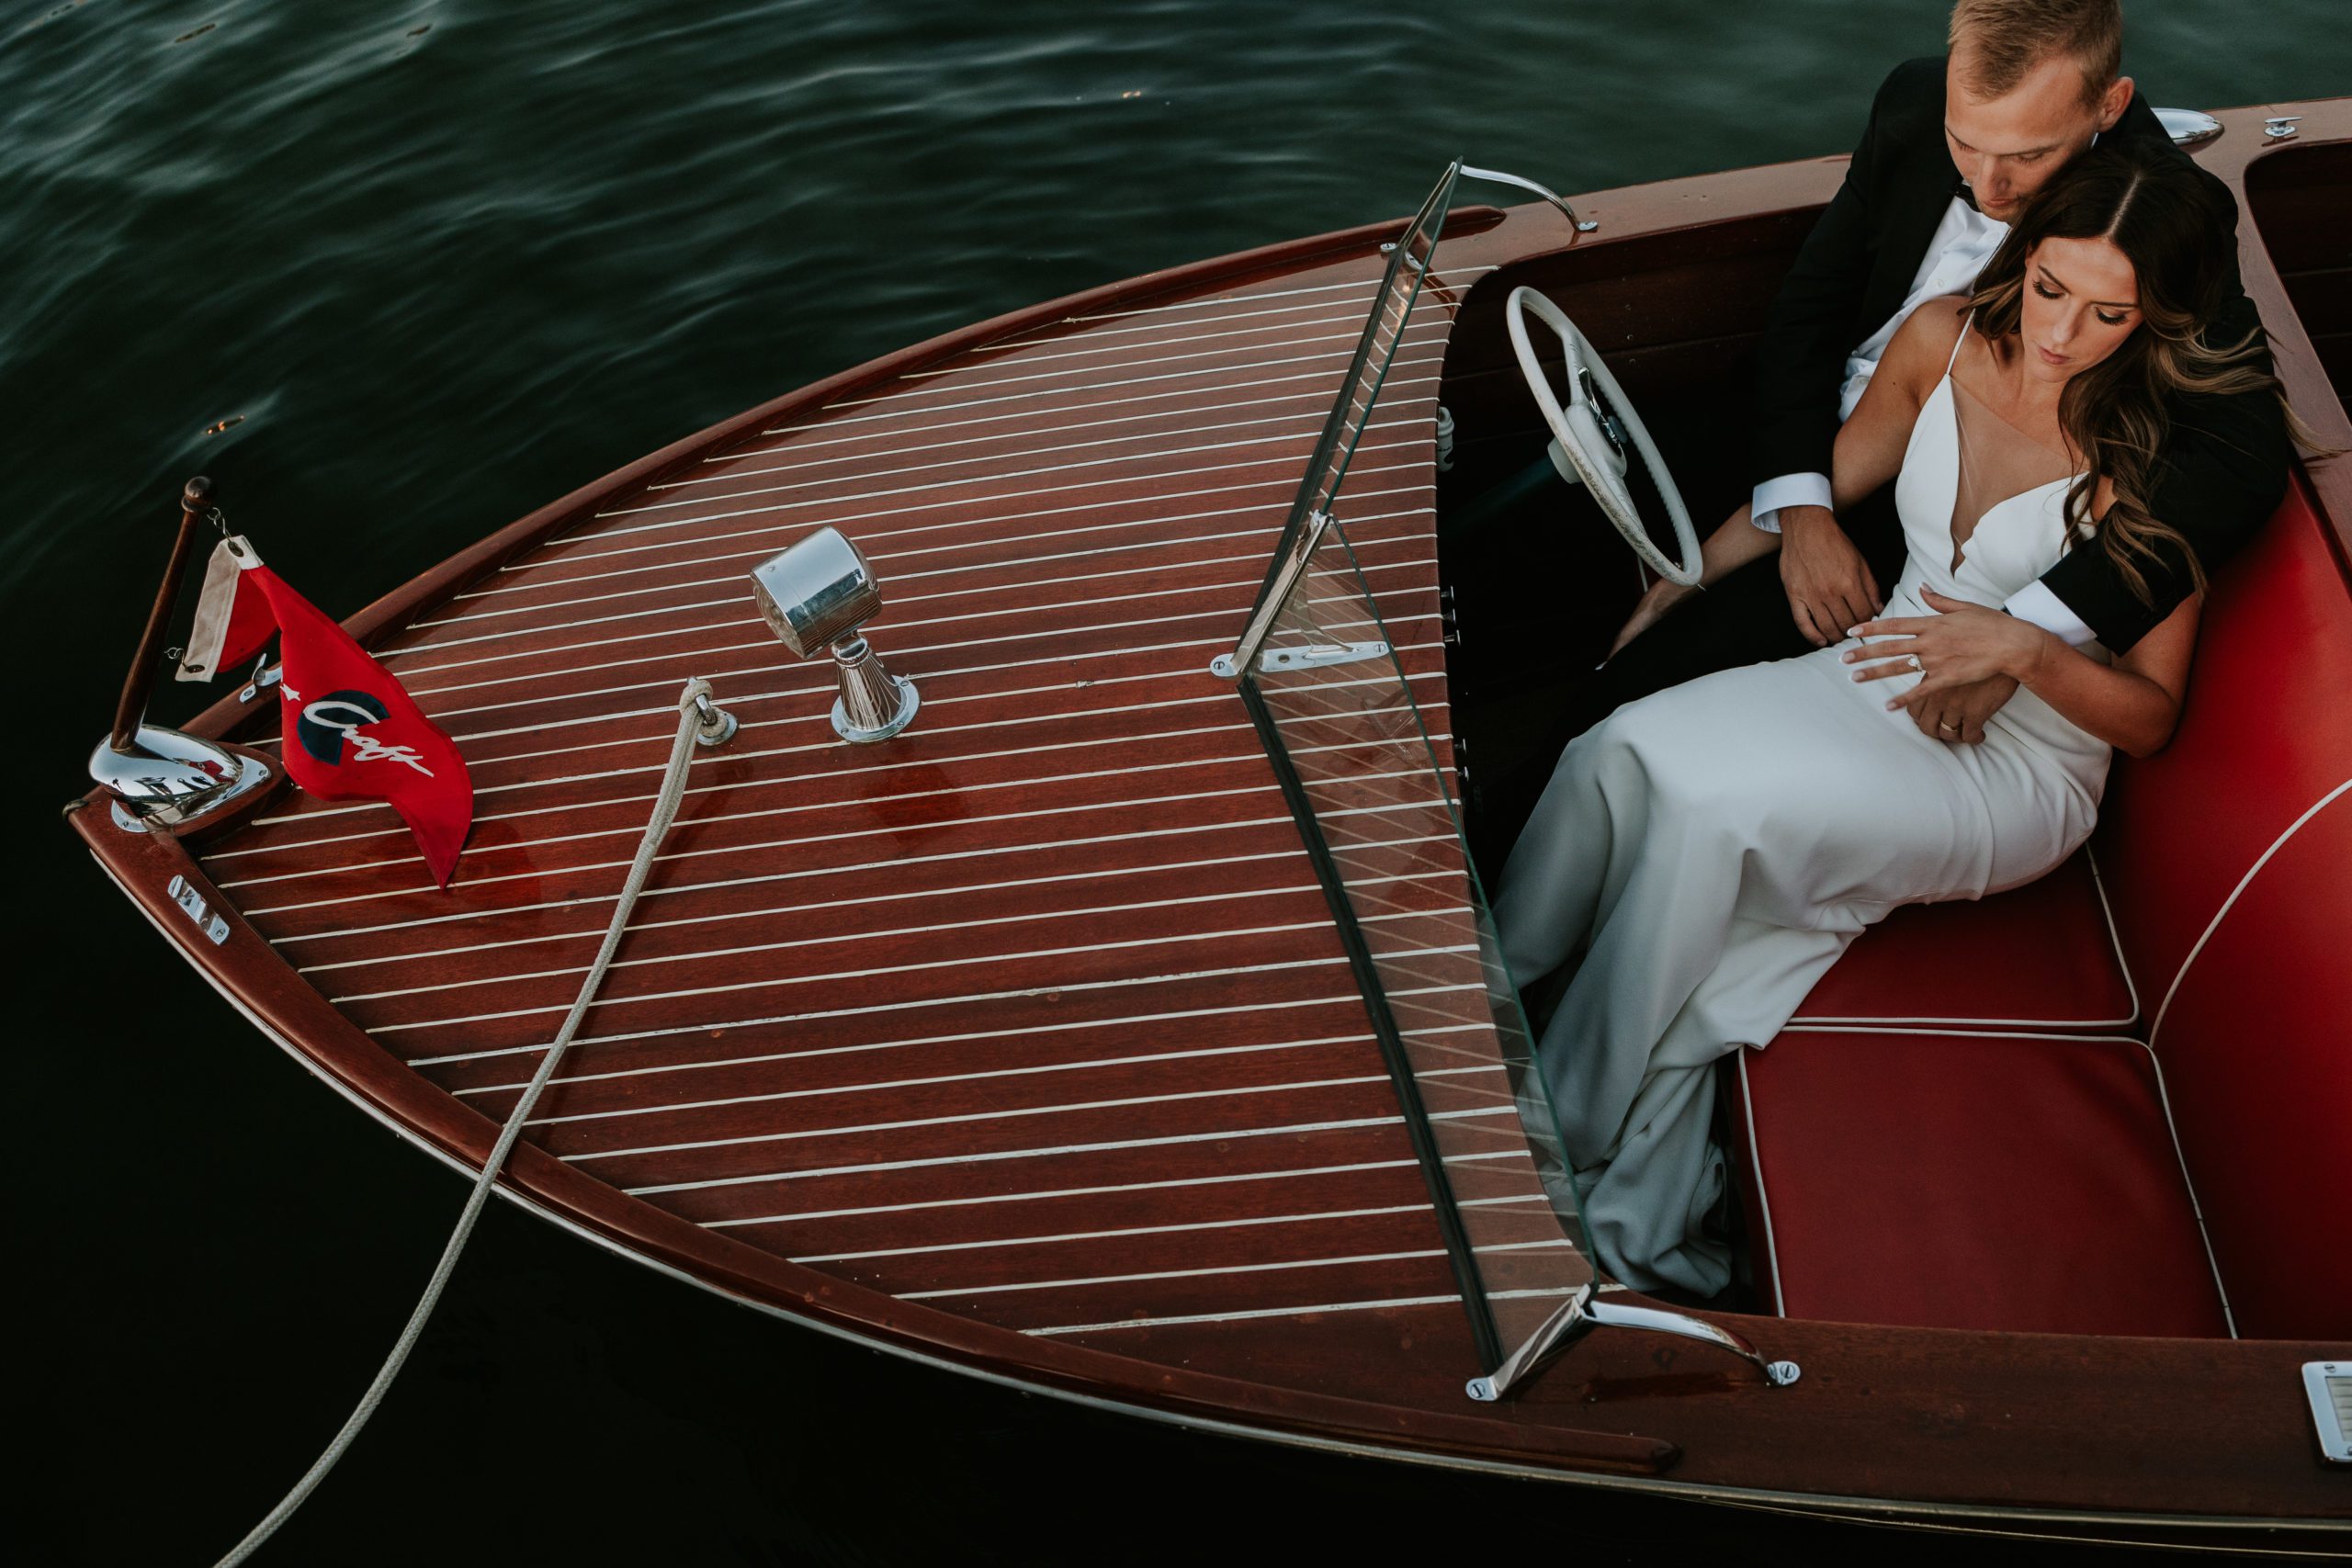 Wedding couple on wooden speedboat in dark shiny waters in lake Okoboji. They are snuggling up on the red bench seat near the steering wheel.